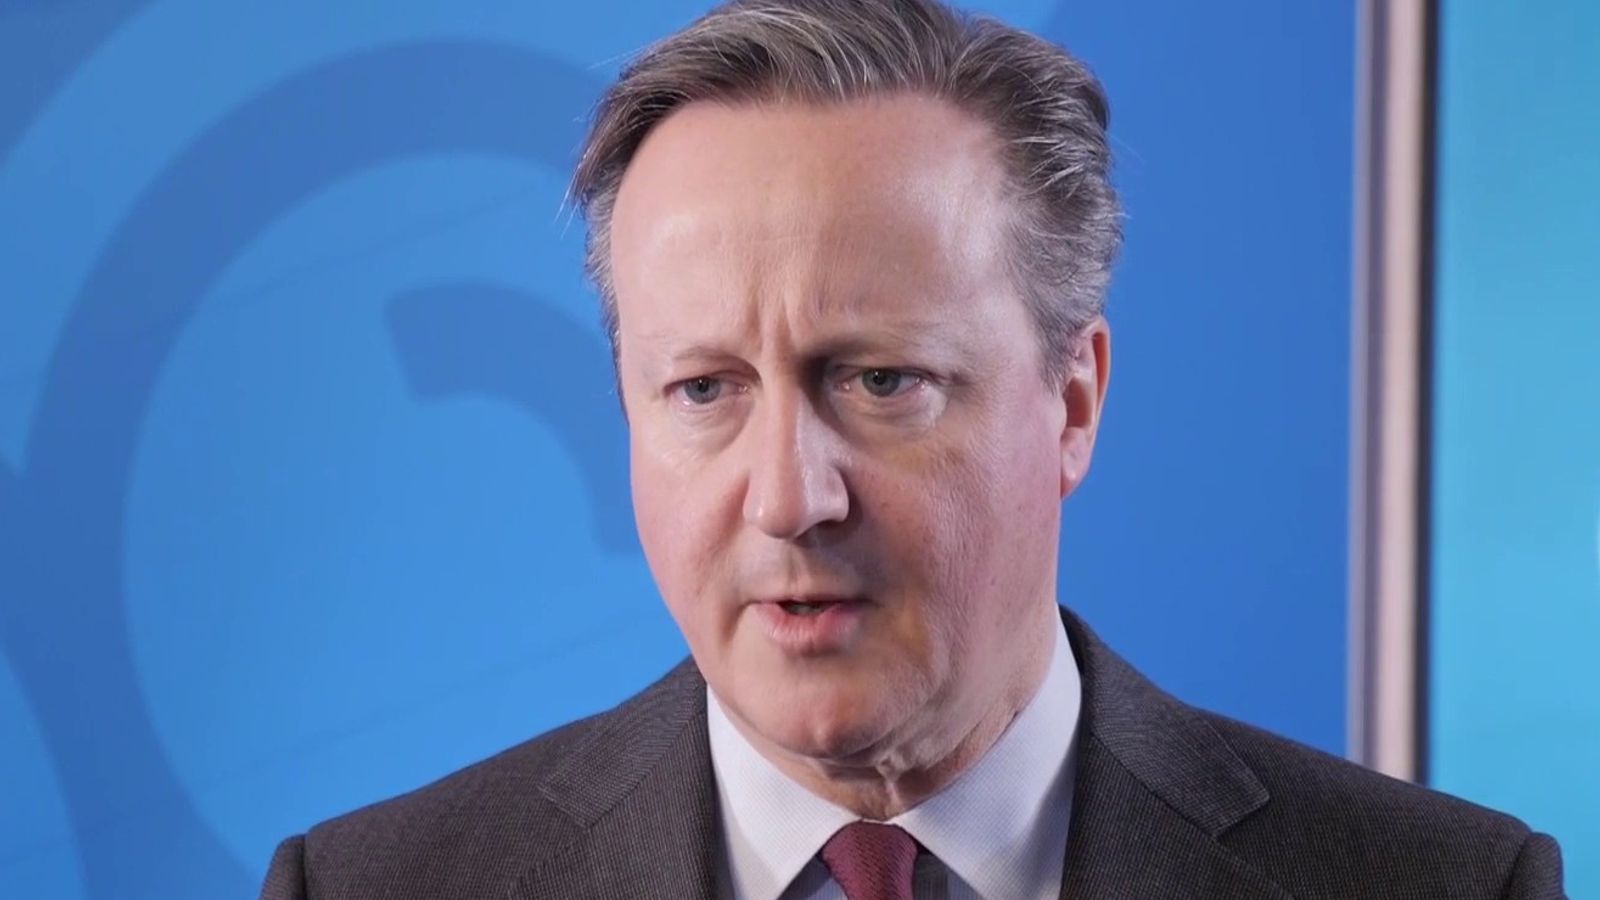 Lord Cameron says Russia 'outmatched' by Ukraine's allies who must 'make difference count'